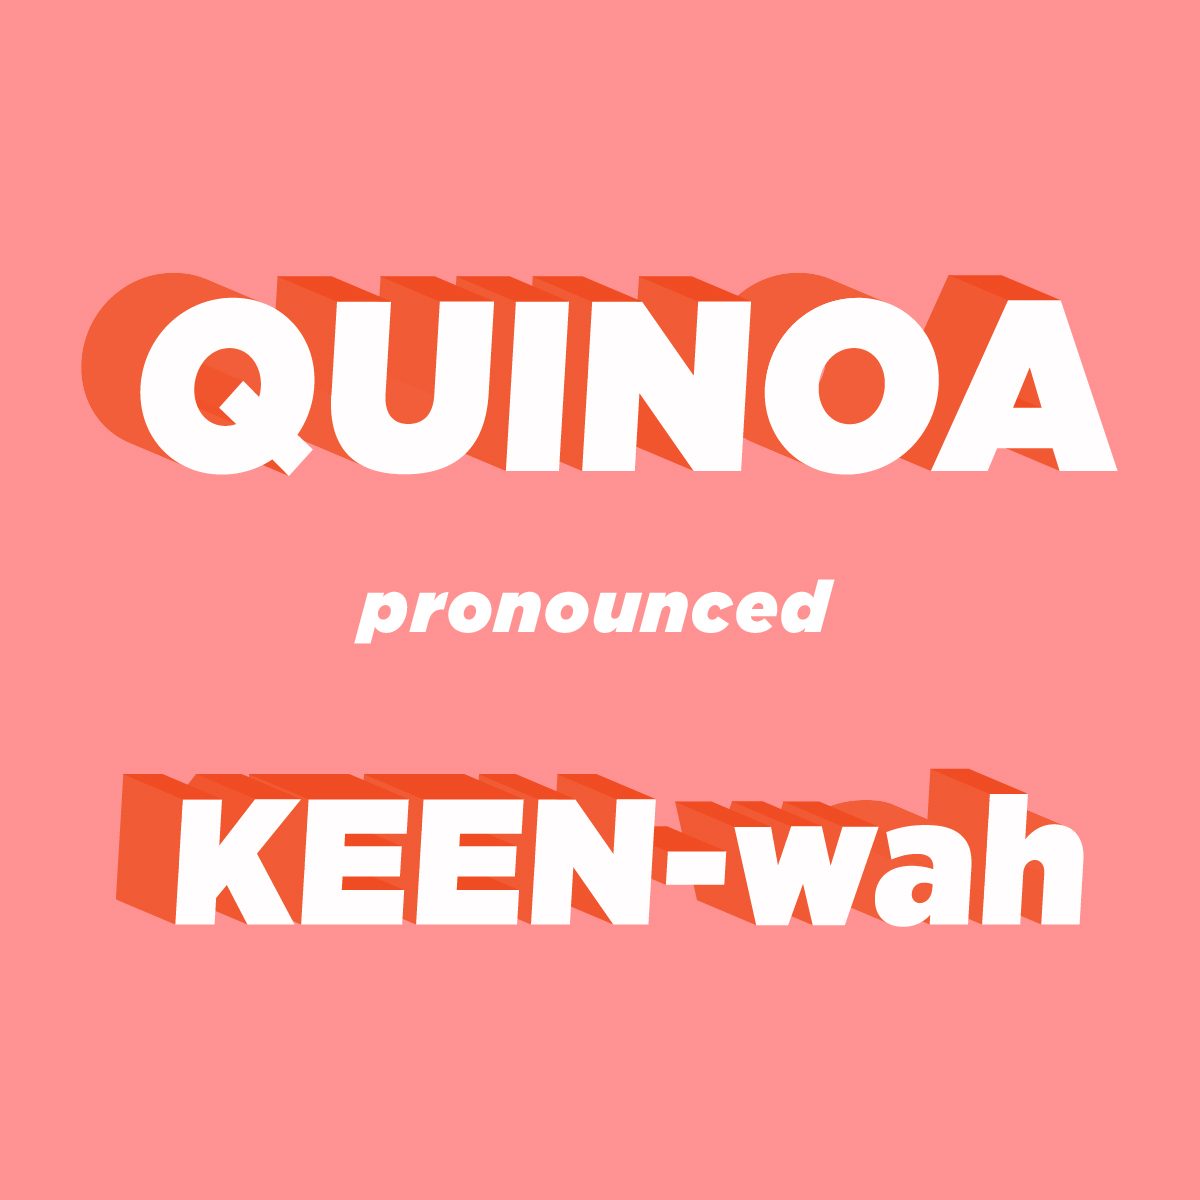 50 commonly mispronounced food words, plus 15 more - HellaWella